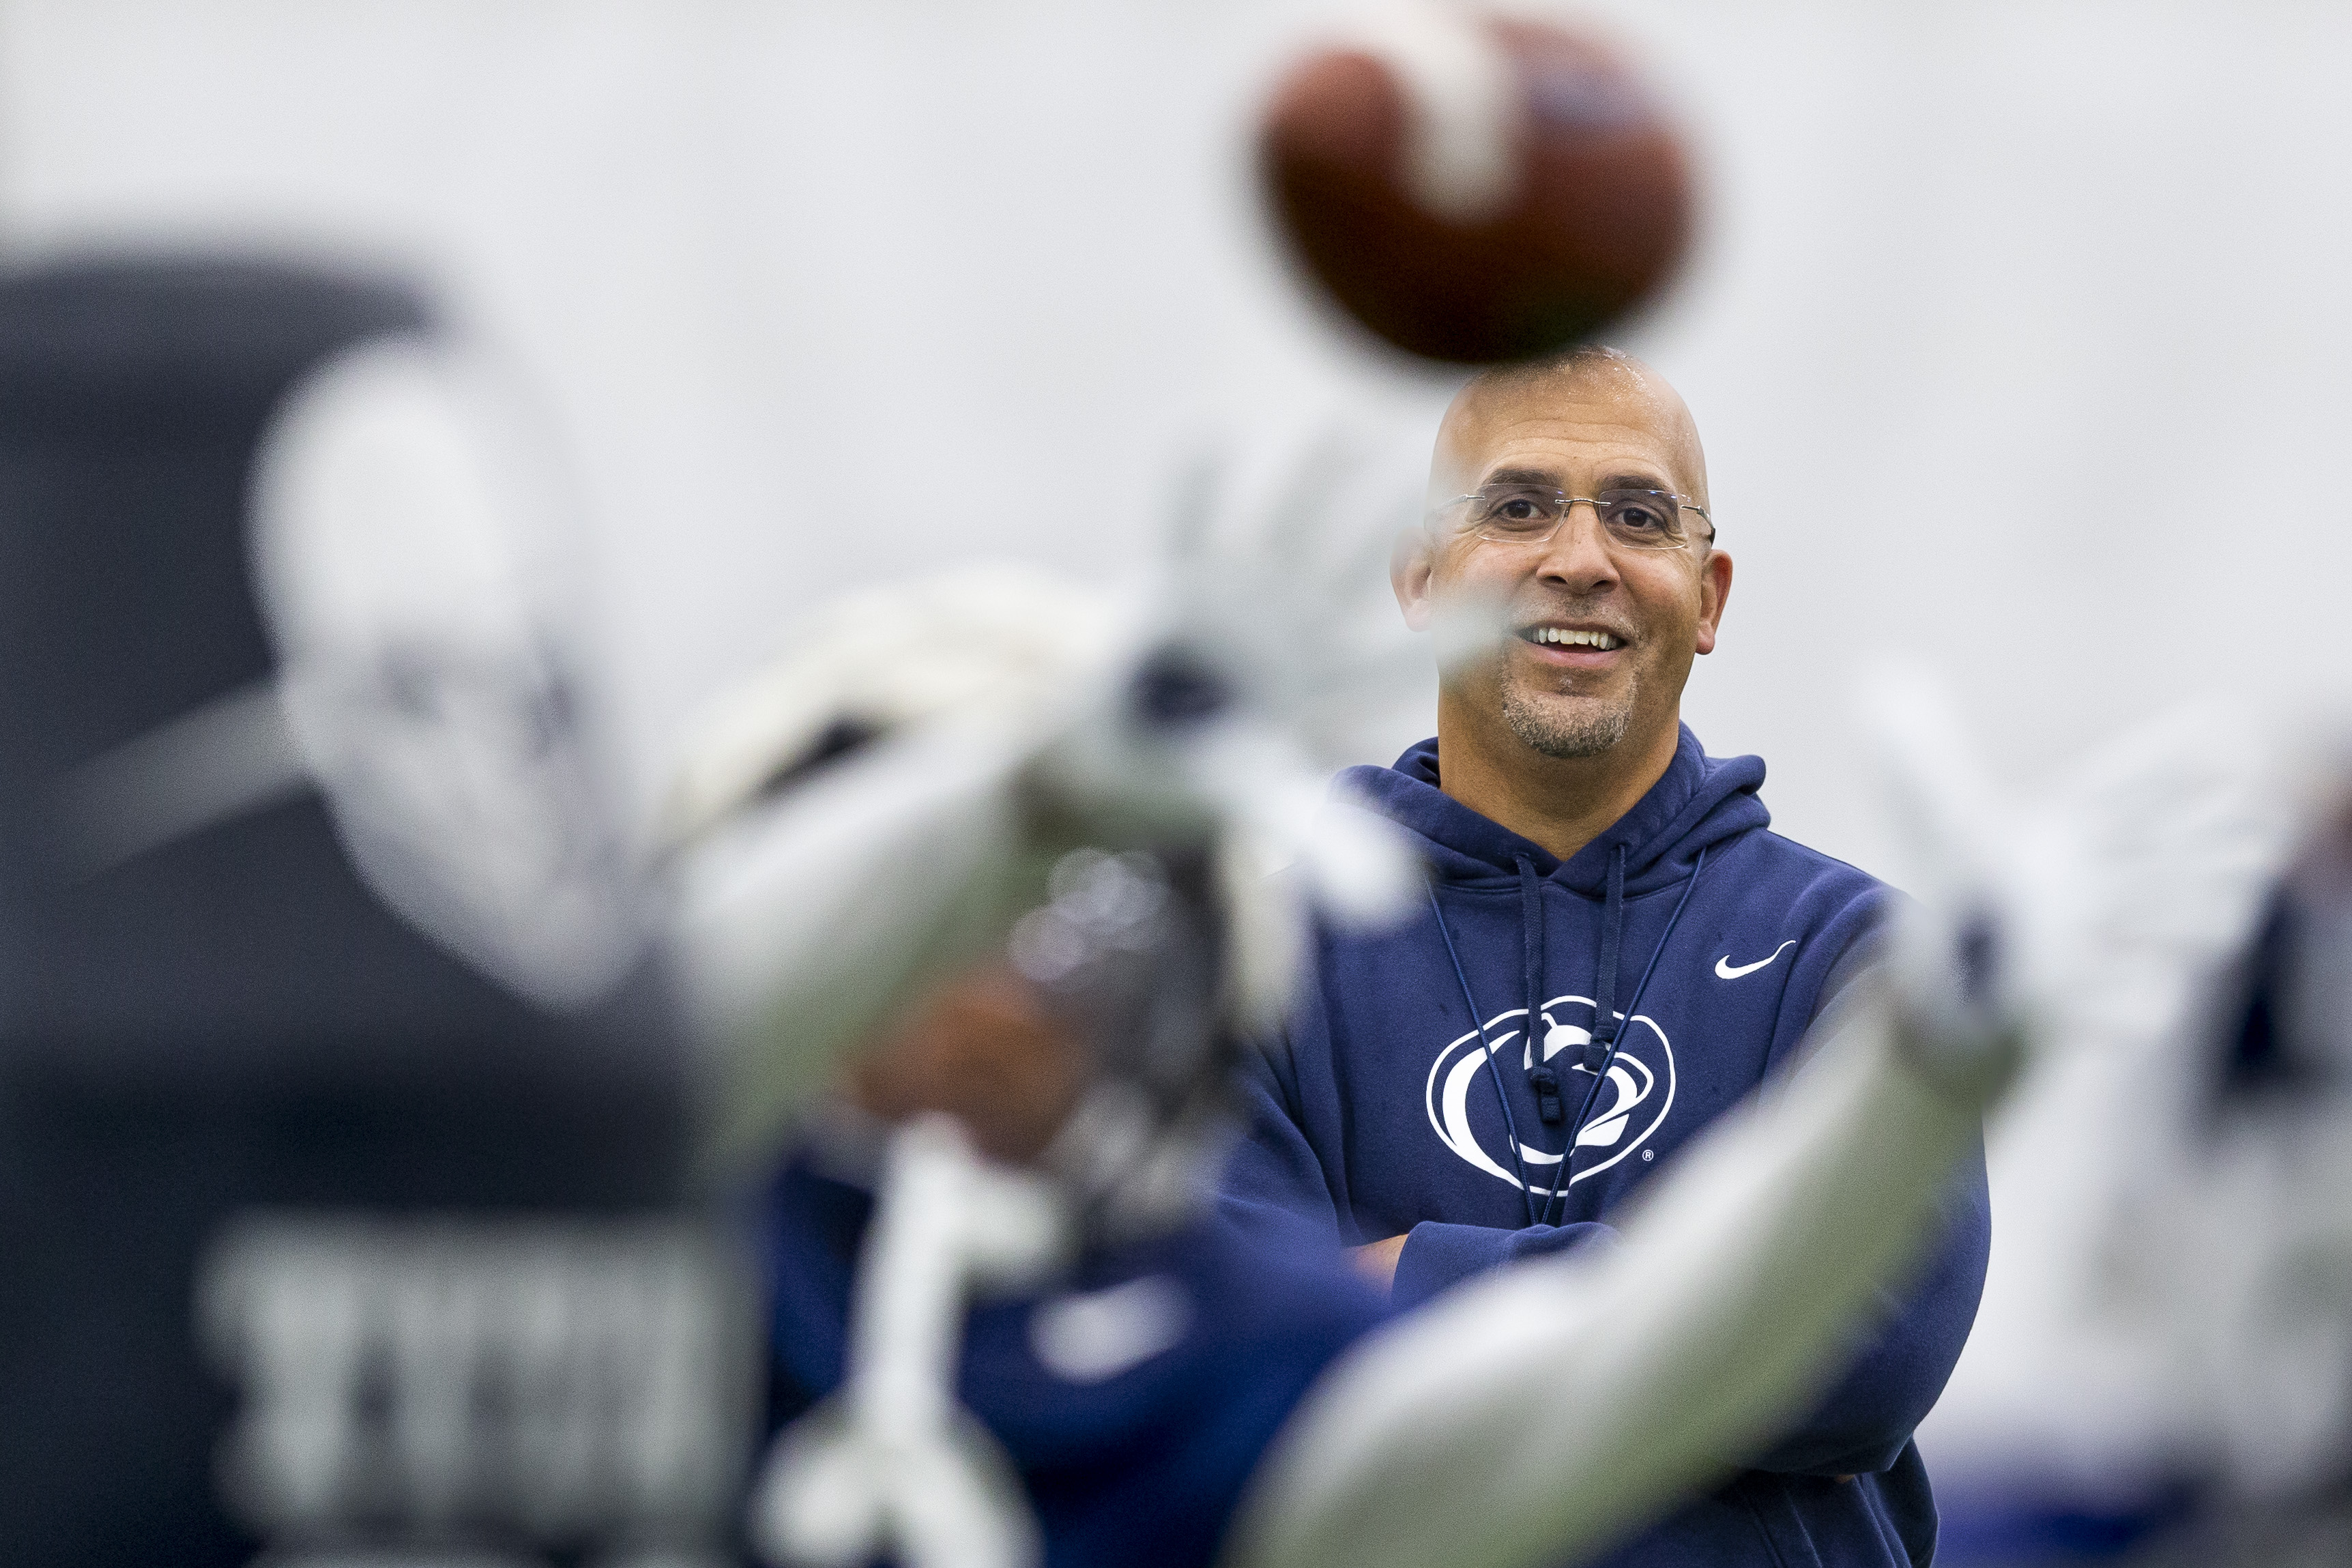 Hey, Jones!”: Can PSU make McCarthy uneasy? How do Nits fare after byes?  Are NFL QBs now untouchable? 